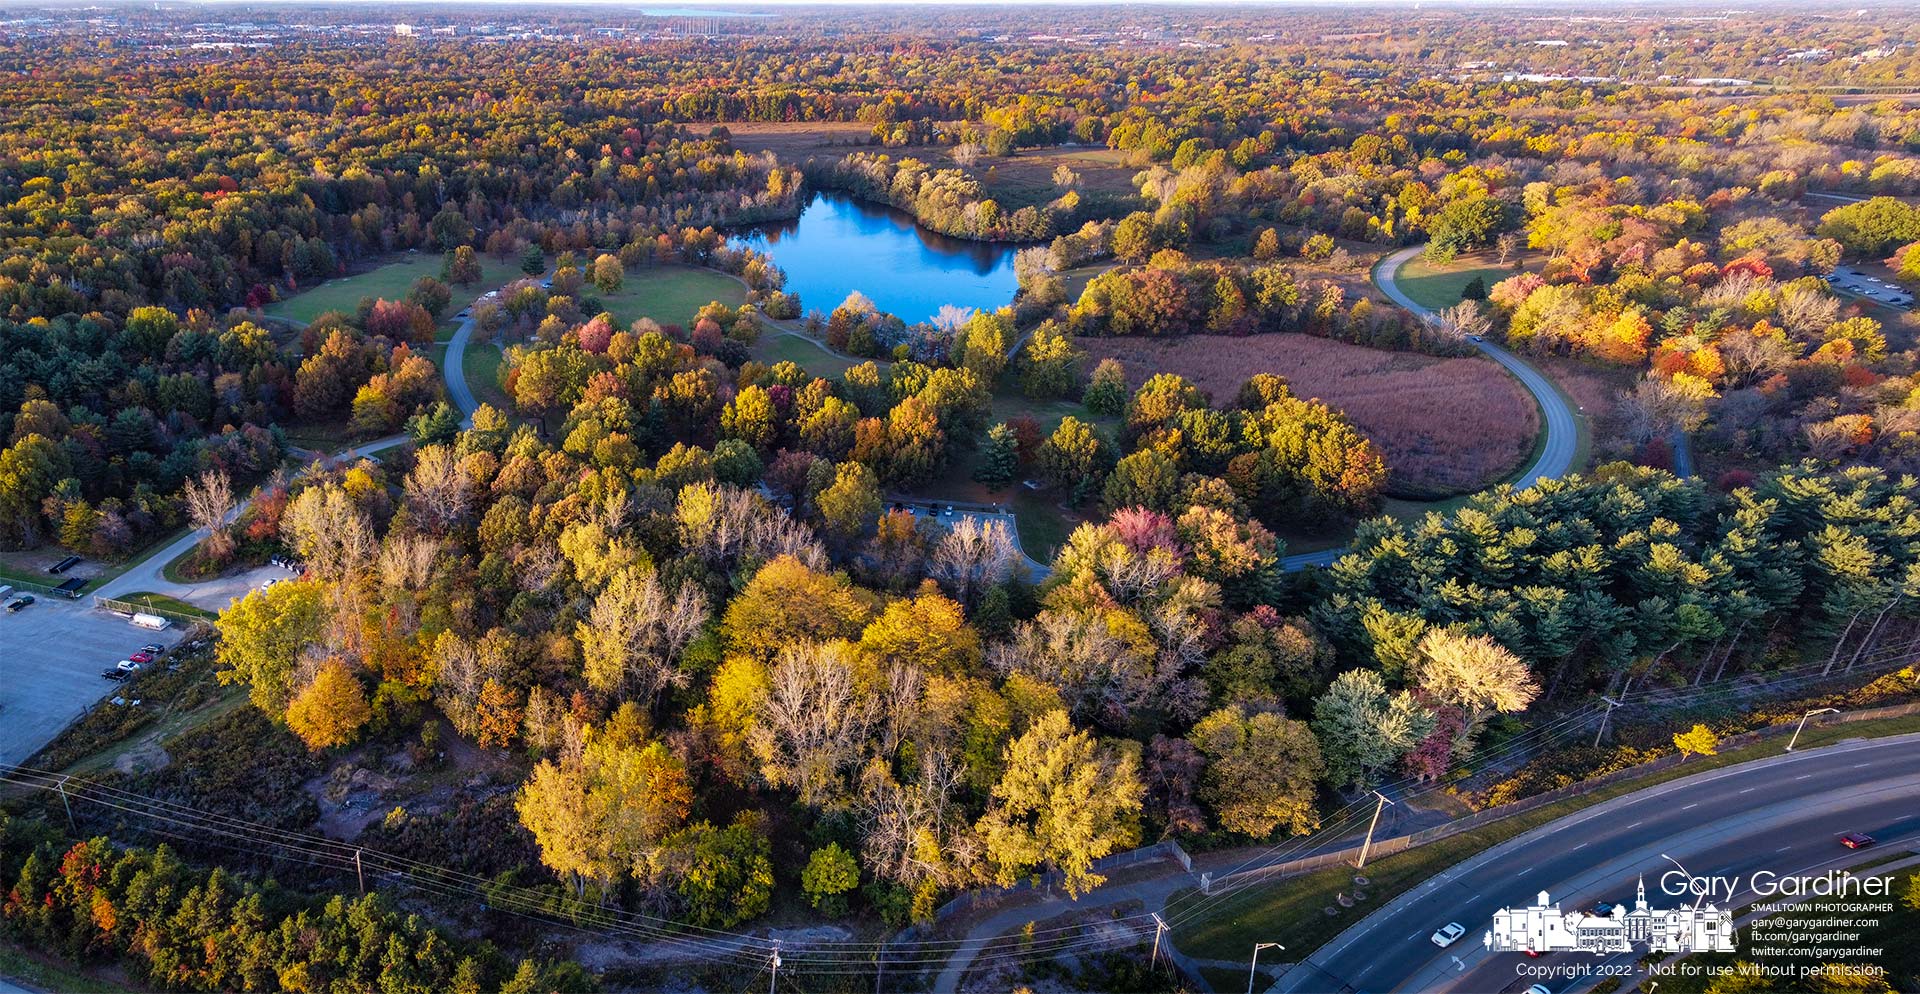 Schrock Lake at Sharon Woods Metro Park offers a still blue spot in the center of fall colors. My Final Photo for October 14, 2022.